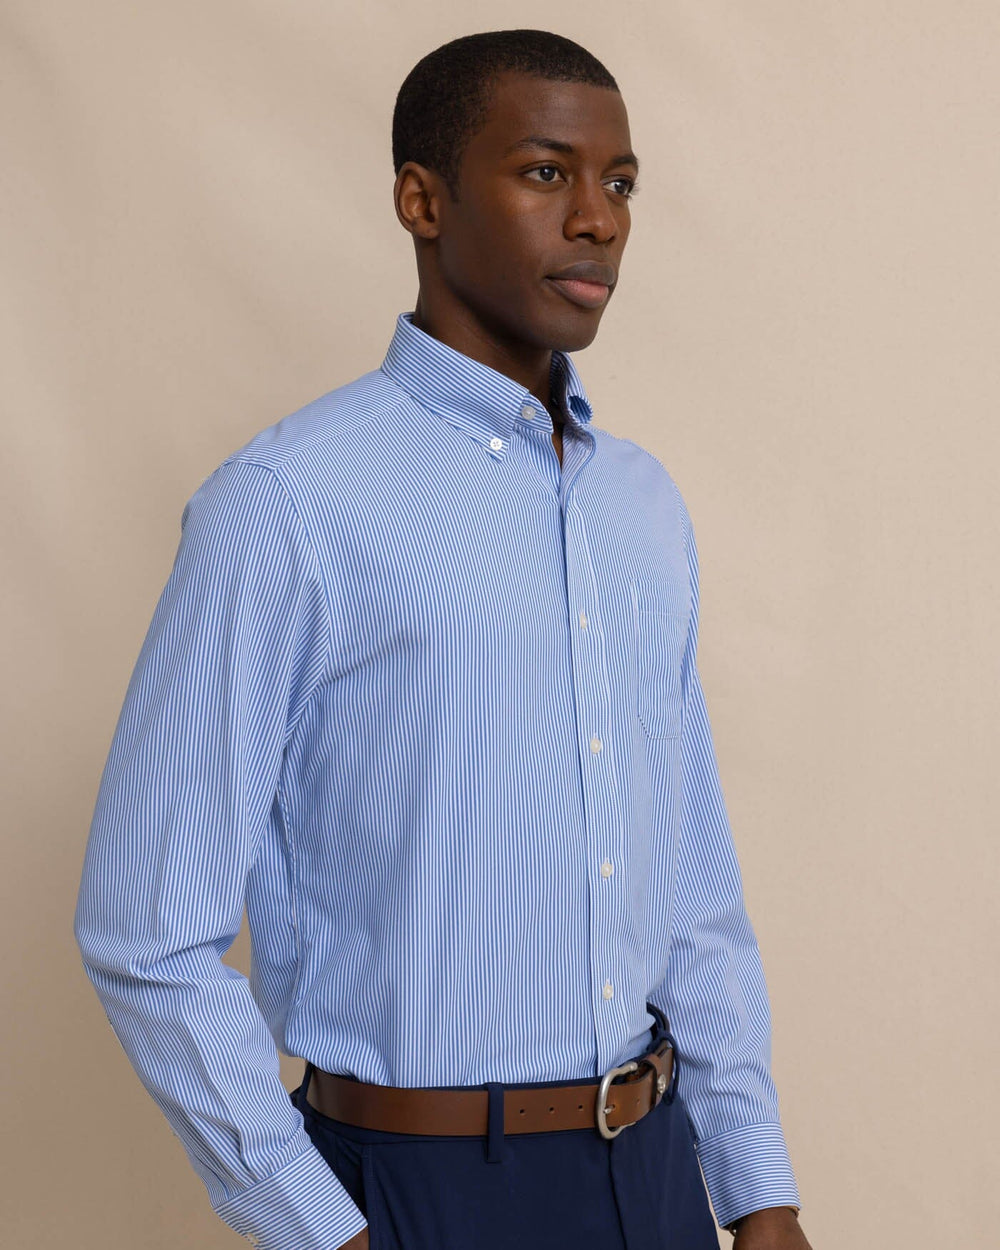 The front view of the Southern Tide Bengal Stripe brrr°® Intercoastal Sport Shirt by Southern Tide - Cobalt Blue